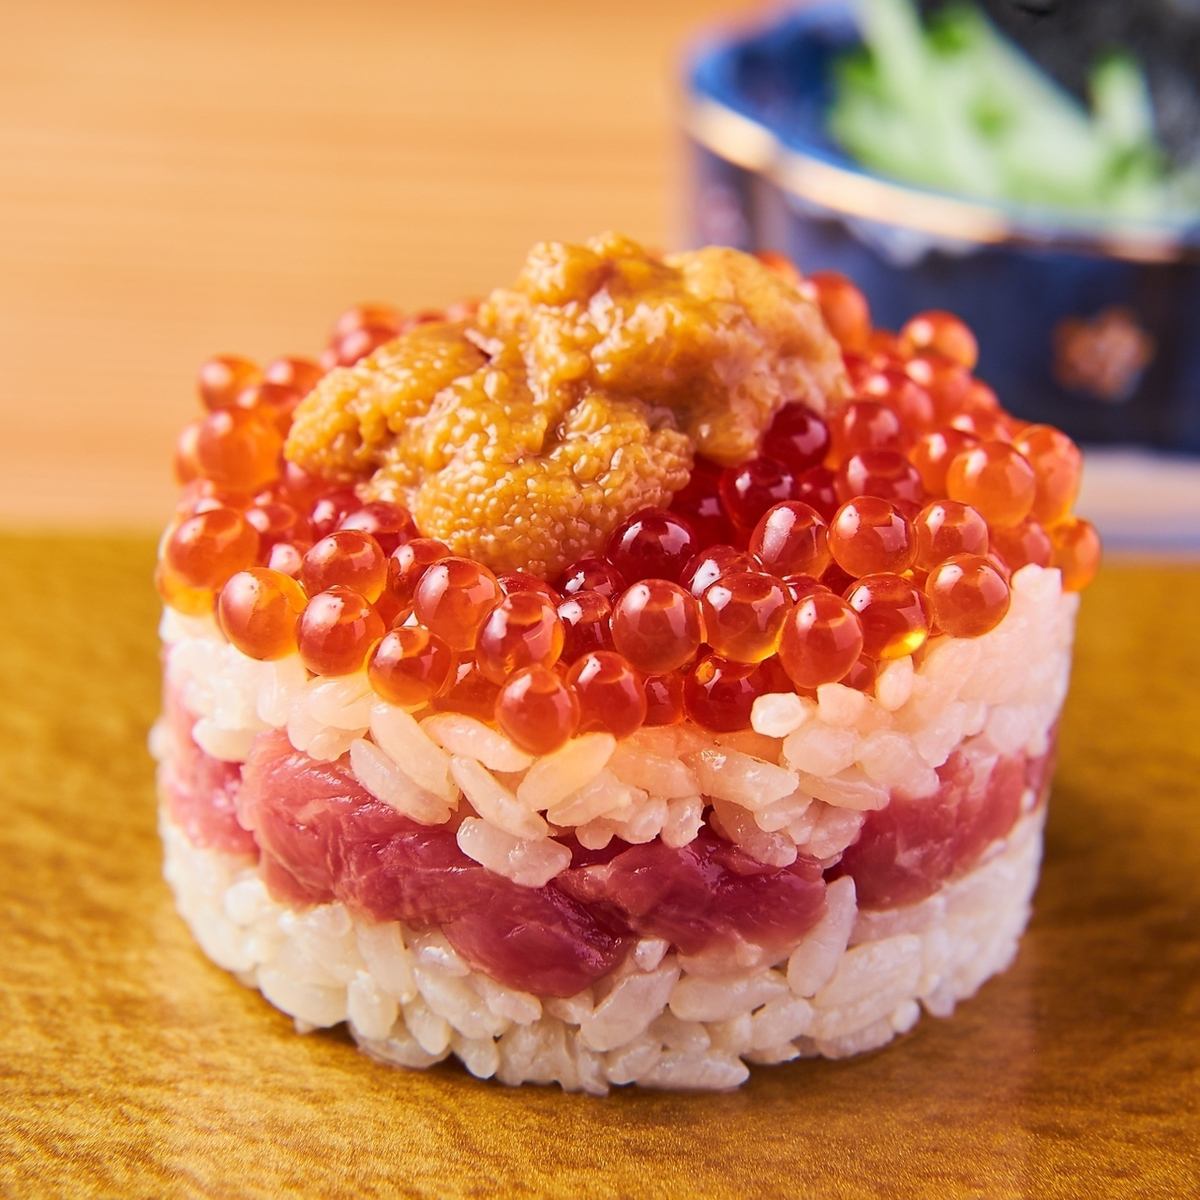 One person is welcome★Enjoy carefully selected sushi at a reasonable price!